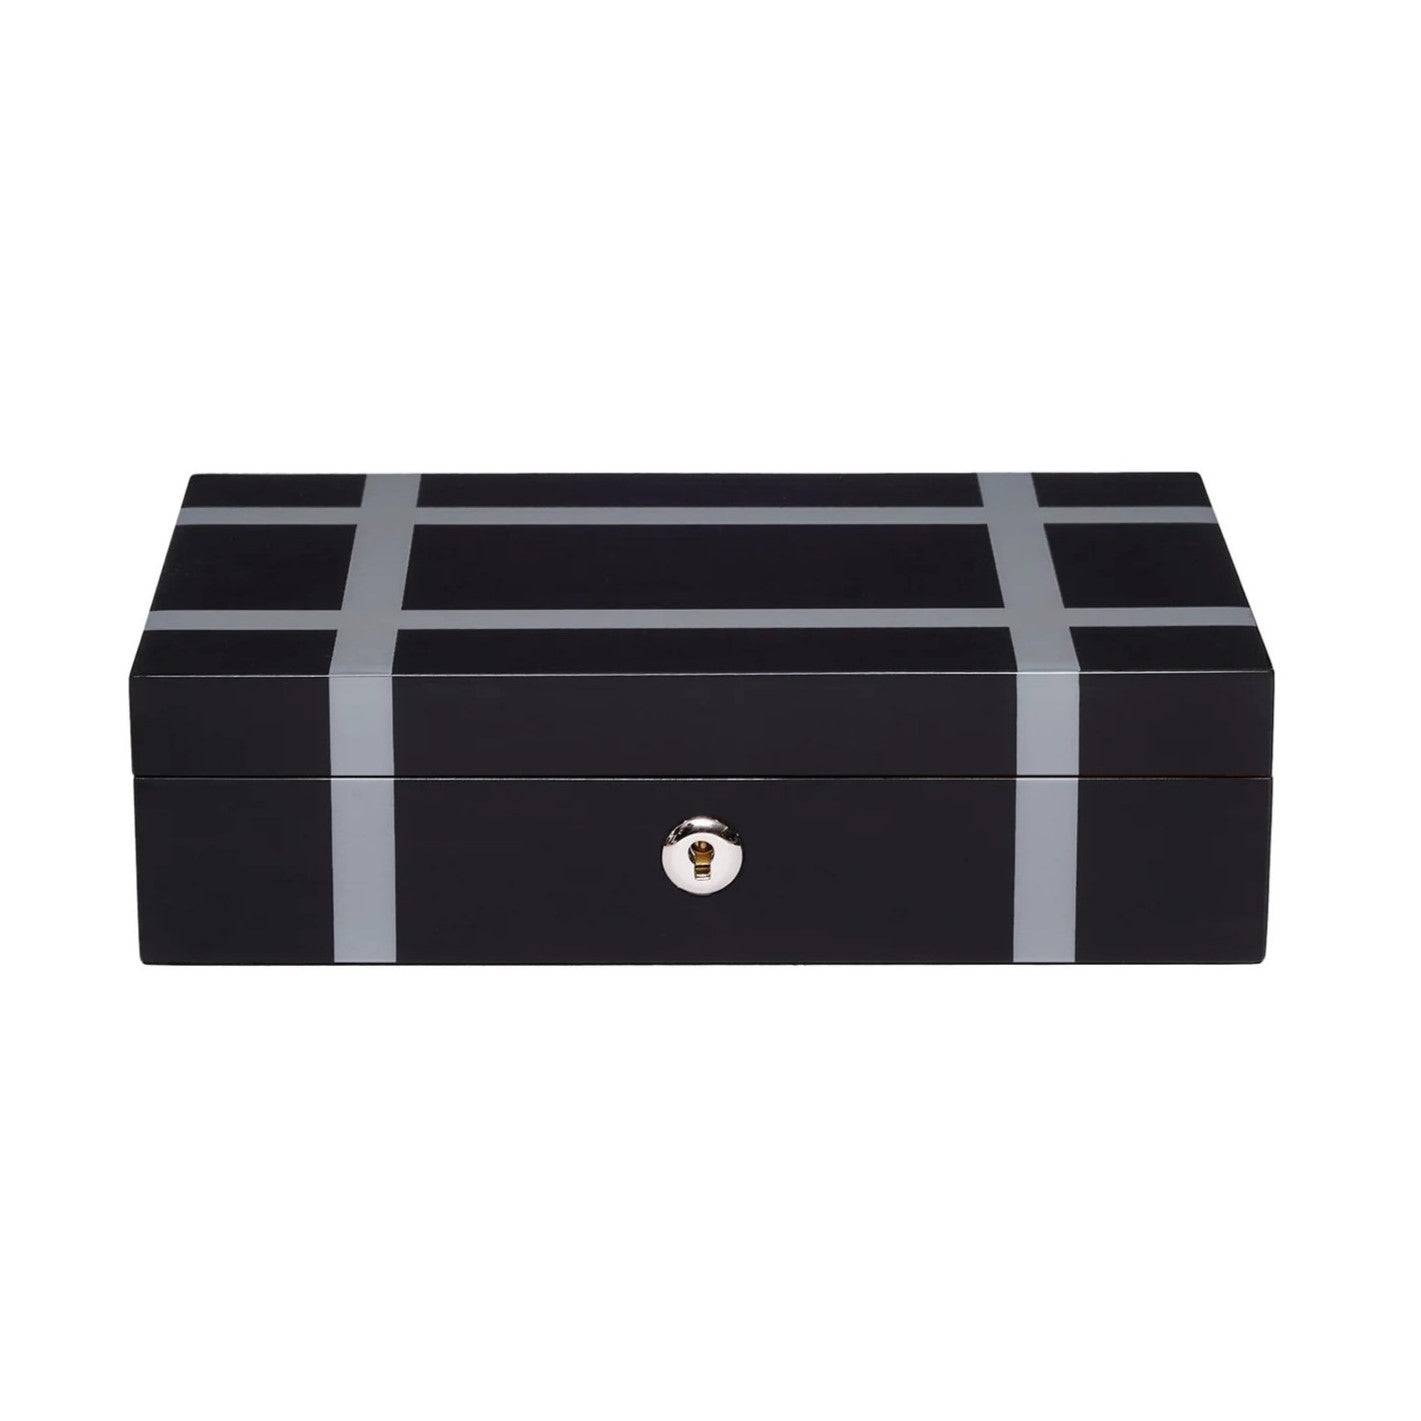 Rapport - Carnaby Multi-Storage Watch Box in Black Lacquer | J165